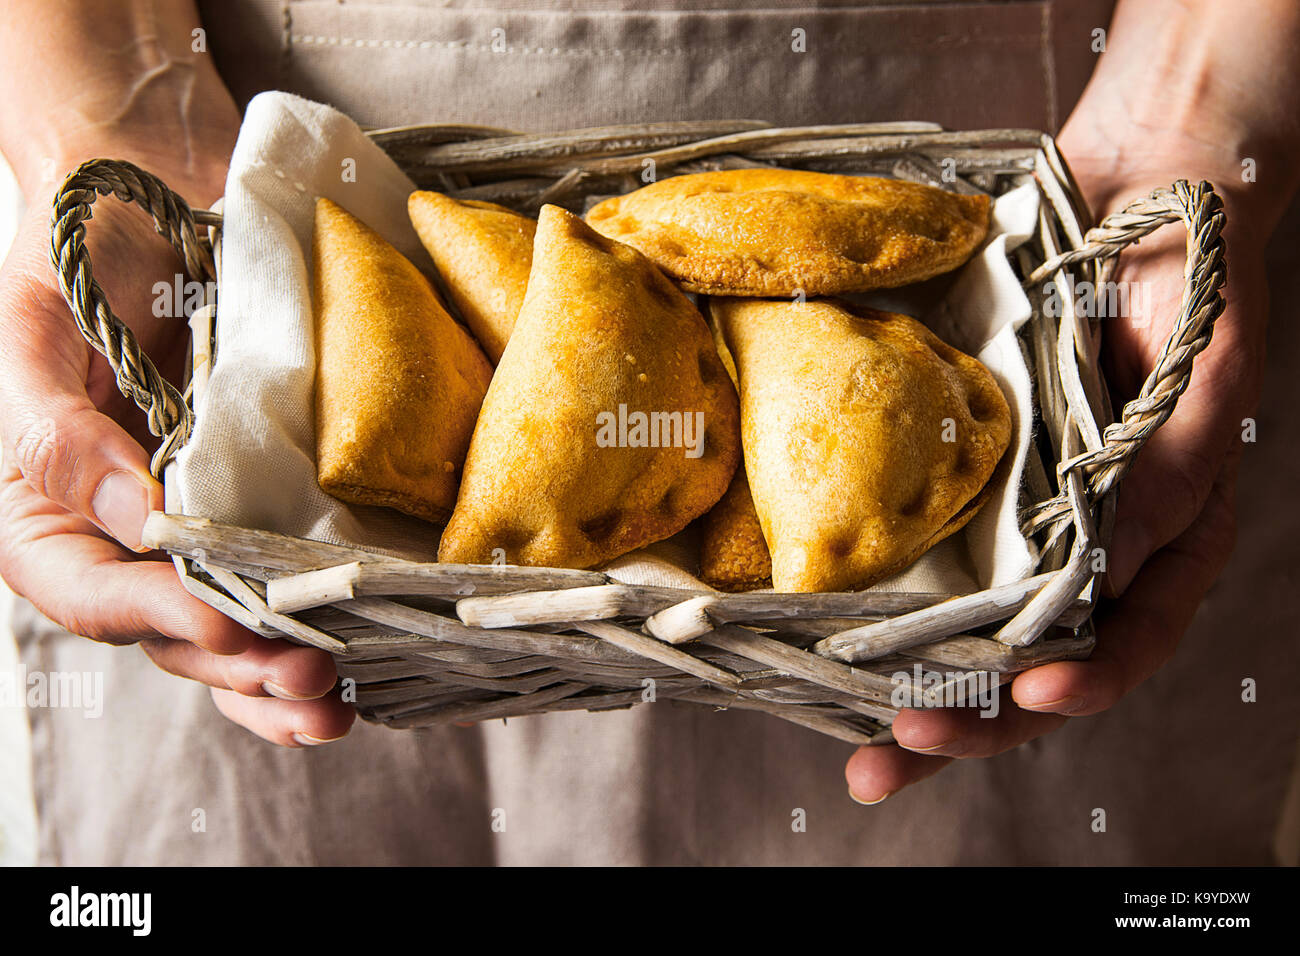 Young woman holding in hands wicker basket with freshly baked empanadas turnover pies with vegetables cheese in tomato sauce. Knfolk style. Cozy authe Stock Photo